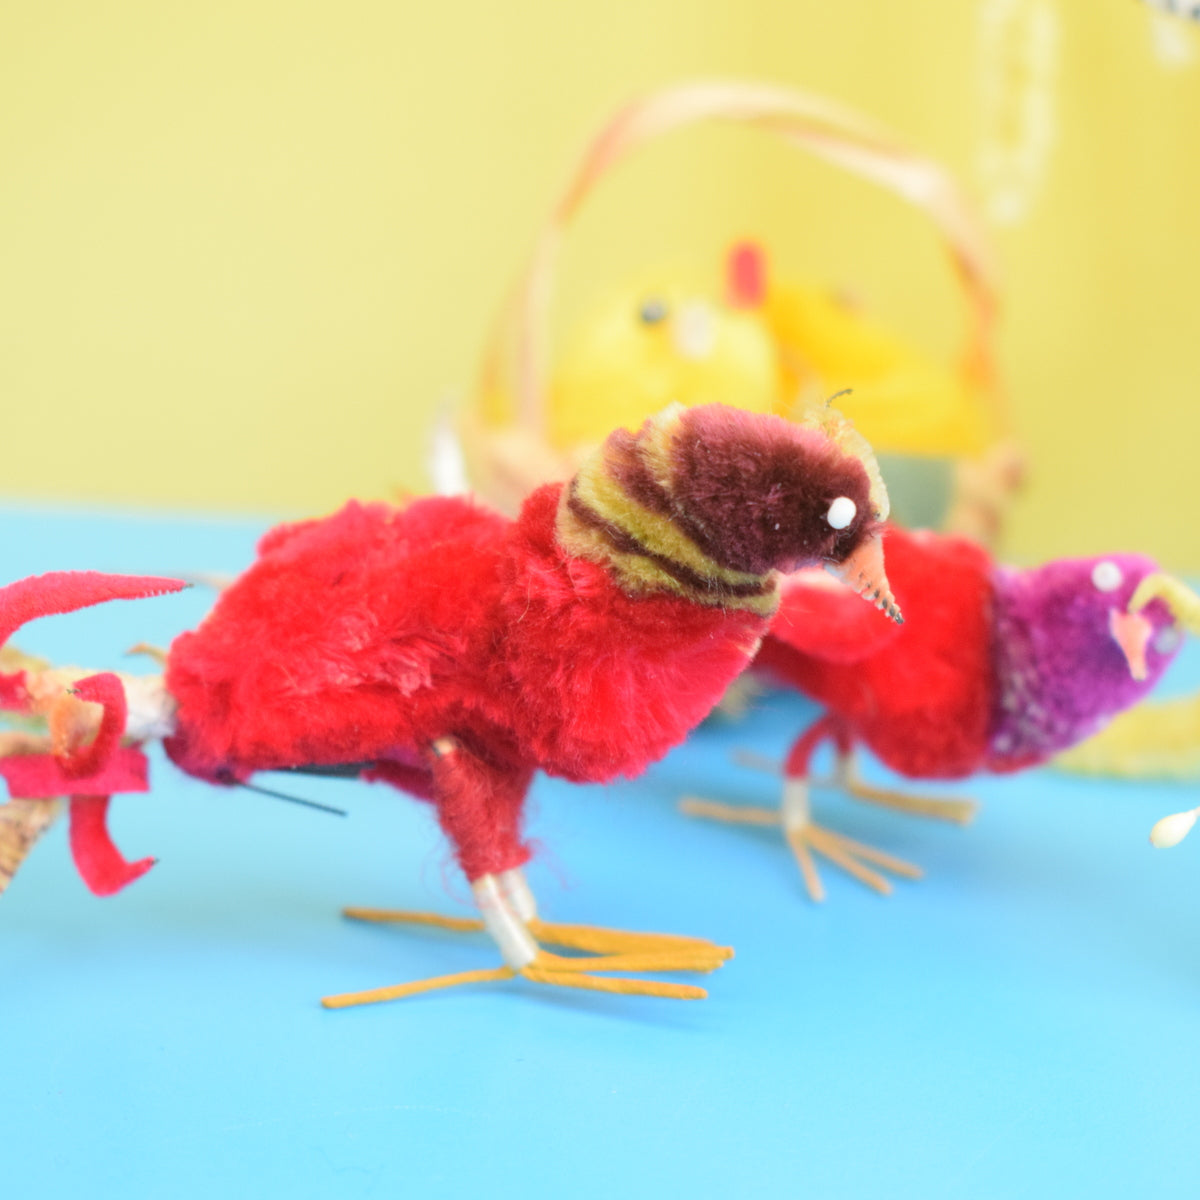 Vintage 1960s Kitsch Pipe Cleaner Creatures / Insects